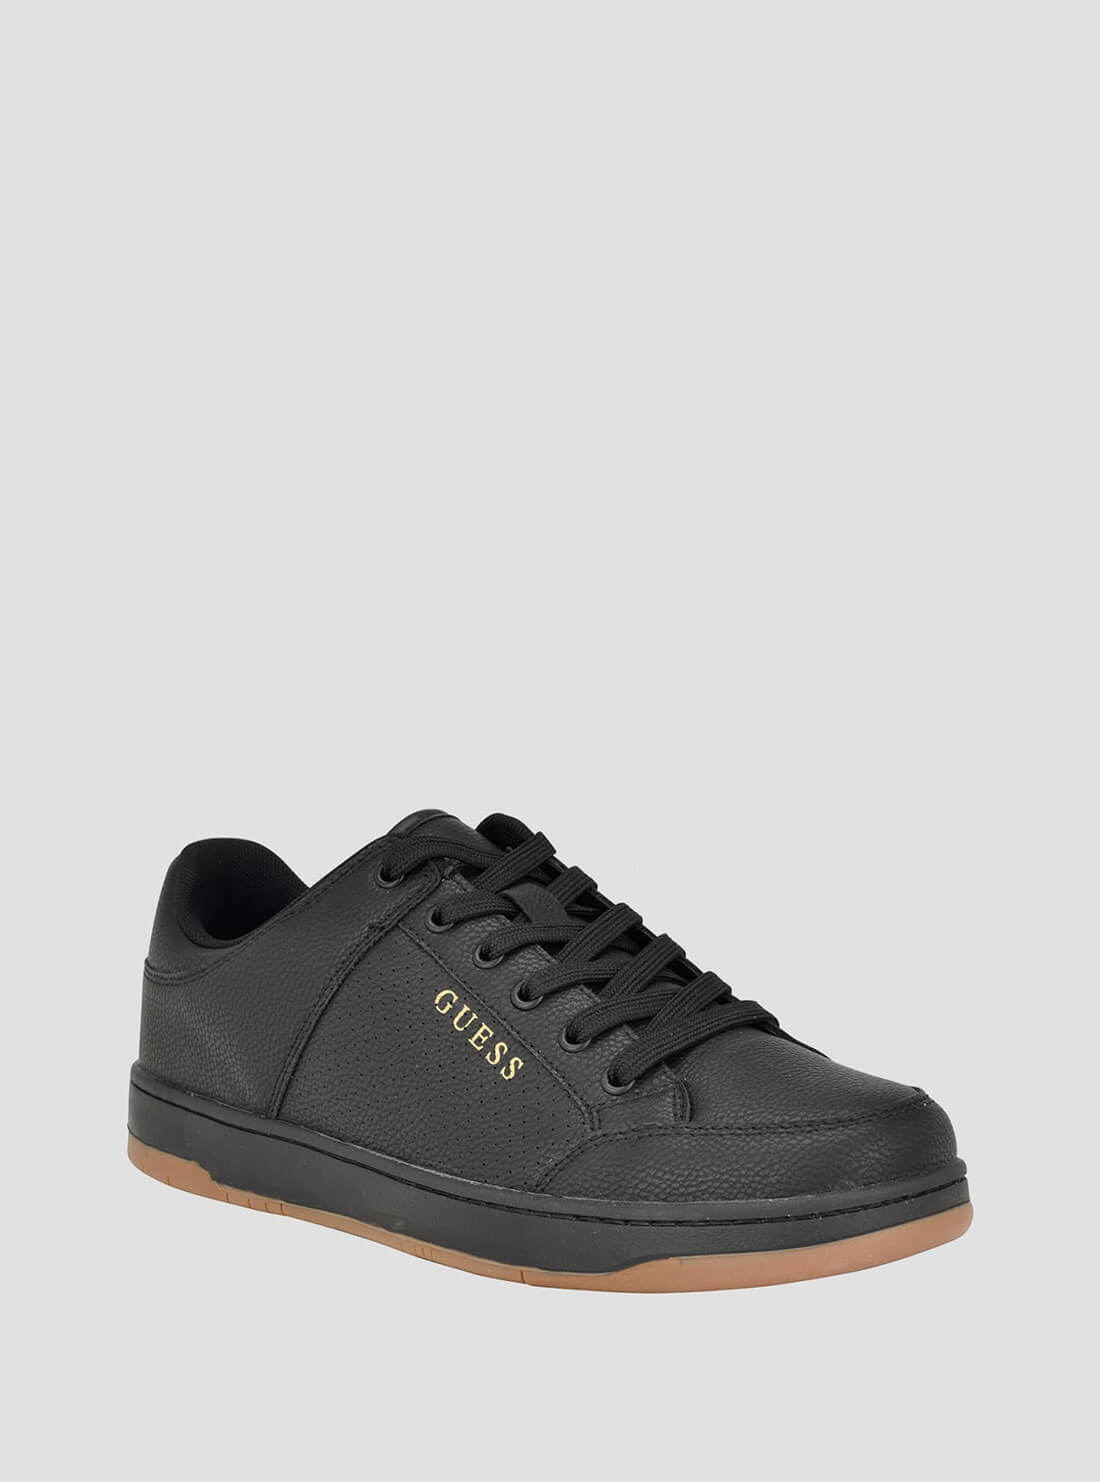 Black Tempo Sneakers | GUESS Men's Shoes | front view